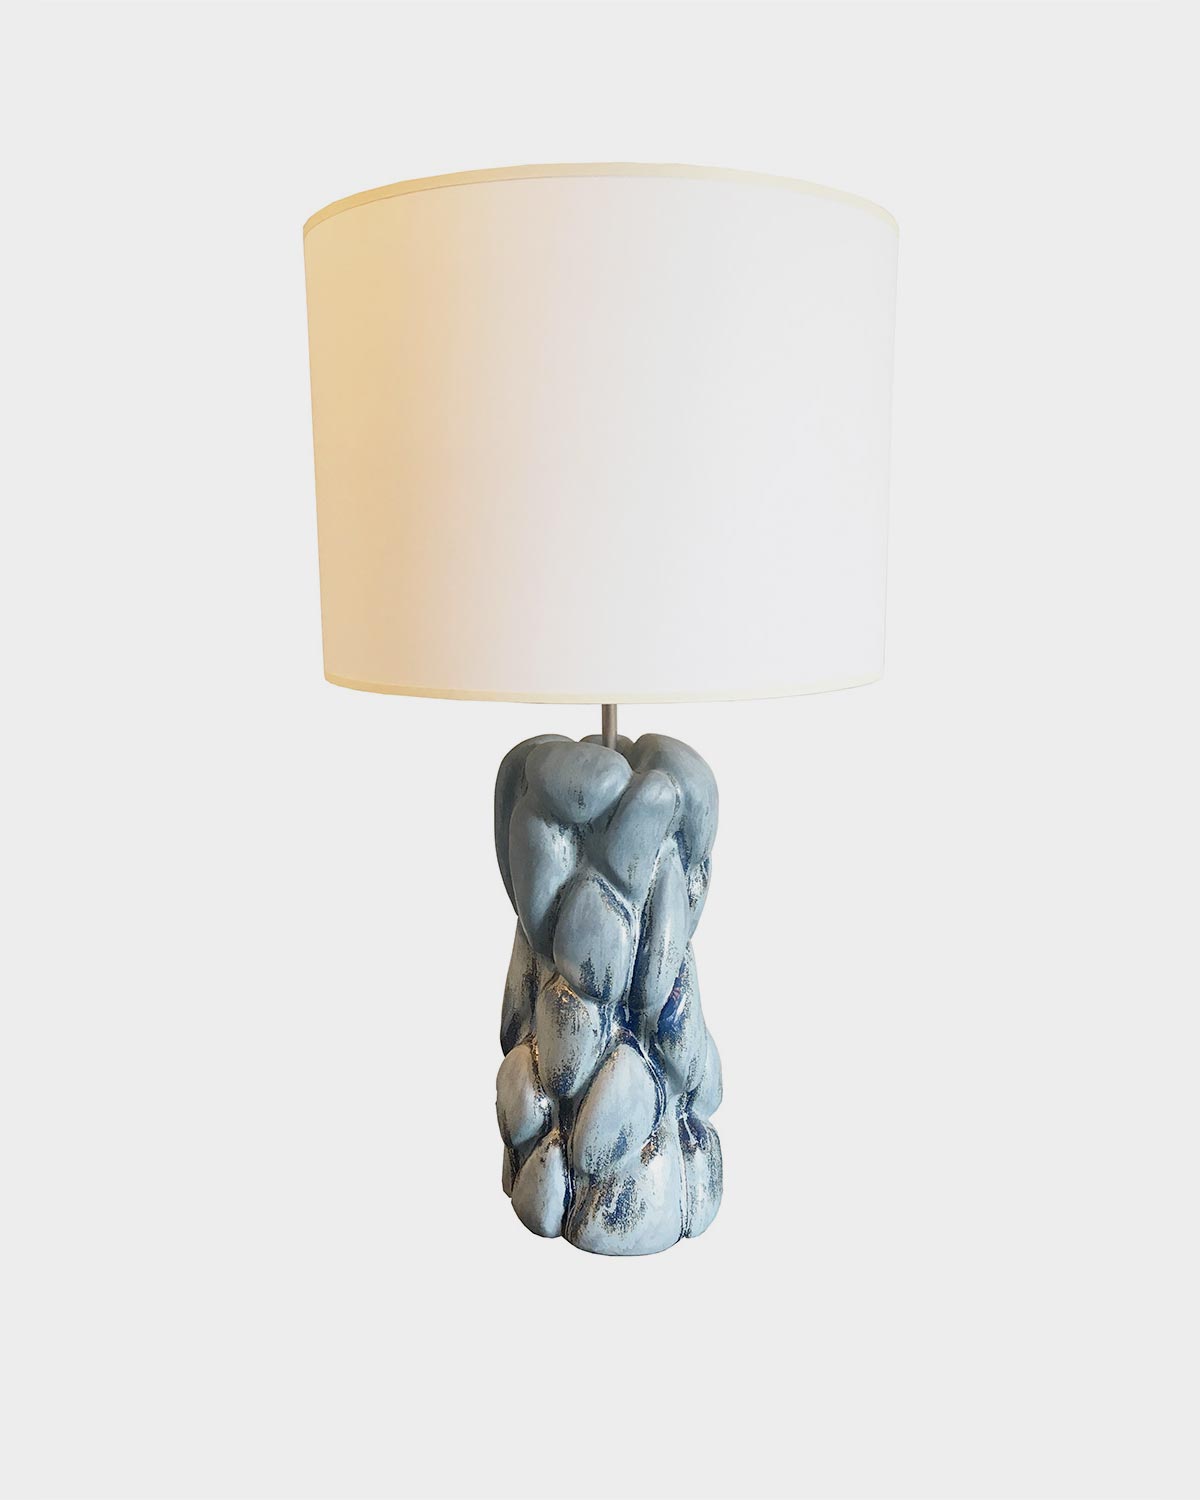 The Emano Table Lamp by Pamela Sunday